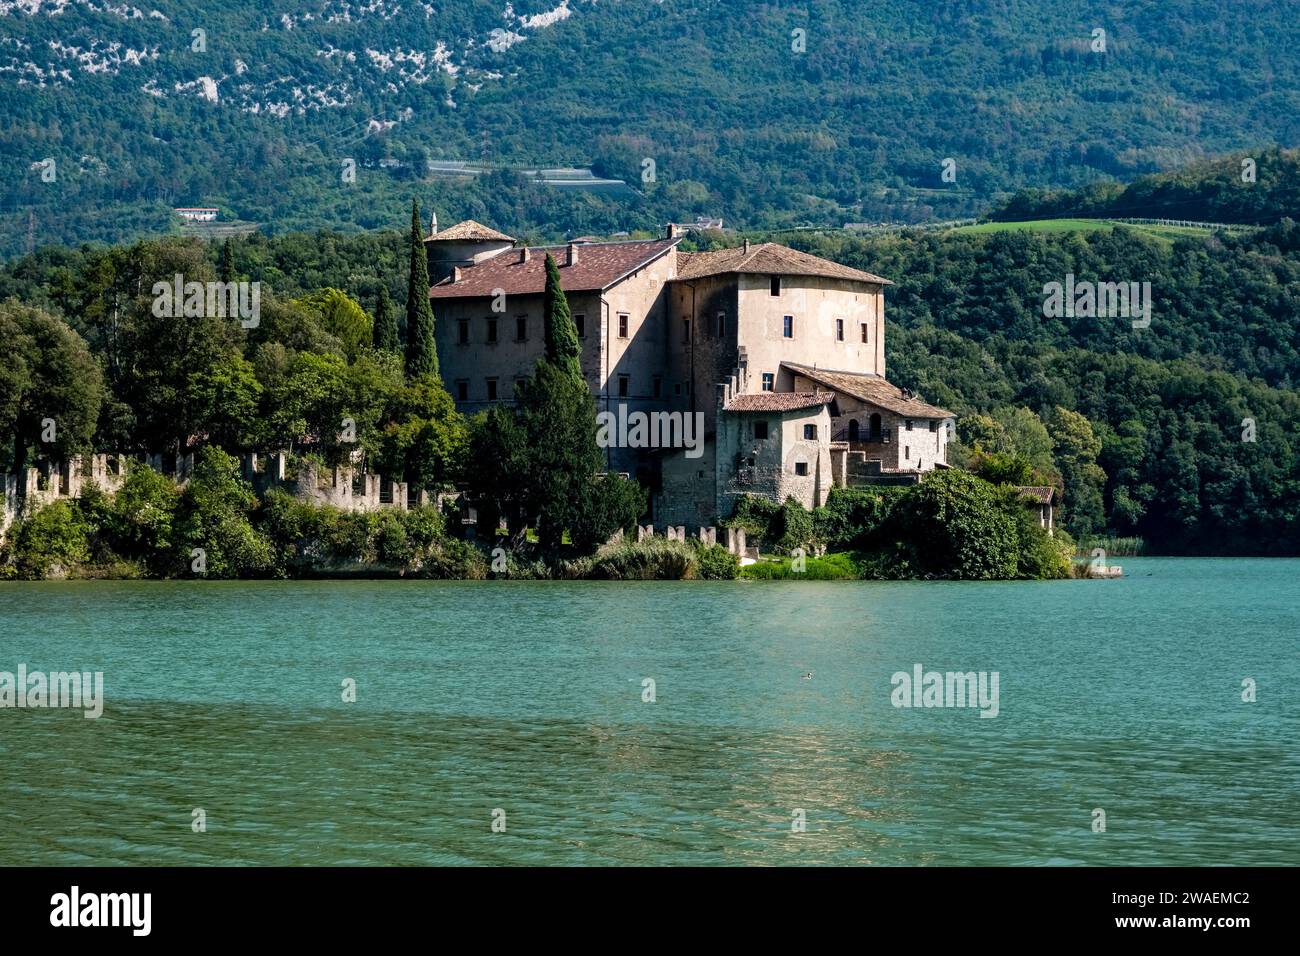 The castle Castel Toblino, built in the 12th century, situated on a peninsula of the lake Lago di Toblino. Stock Photo